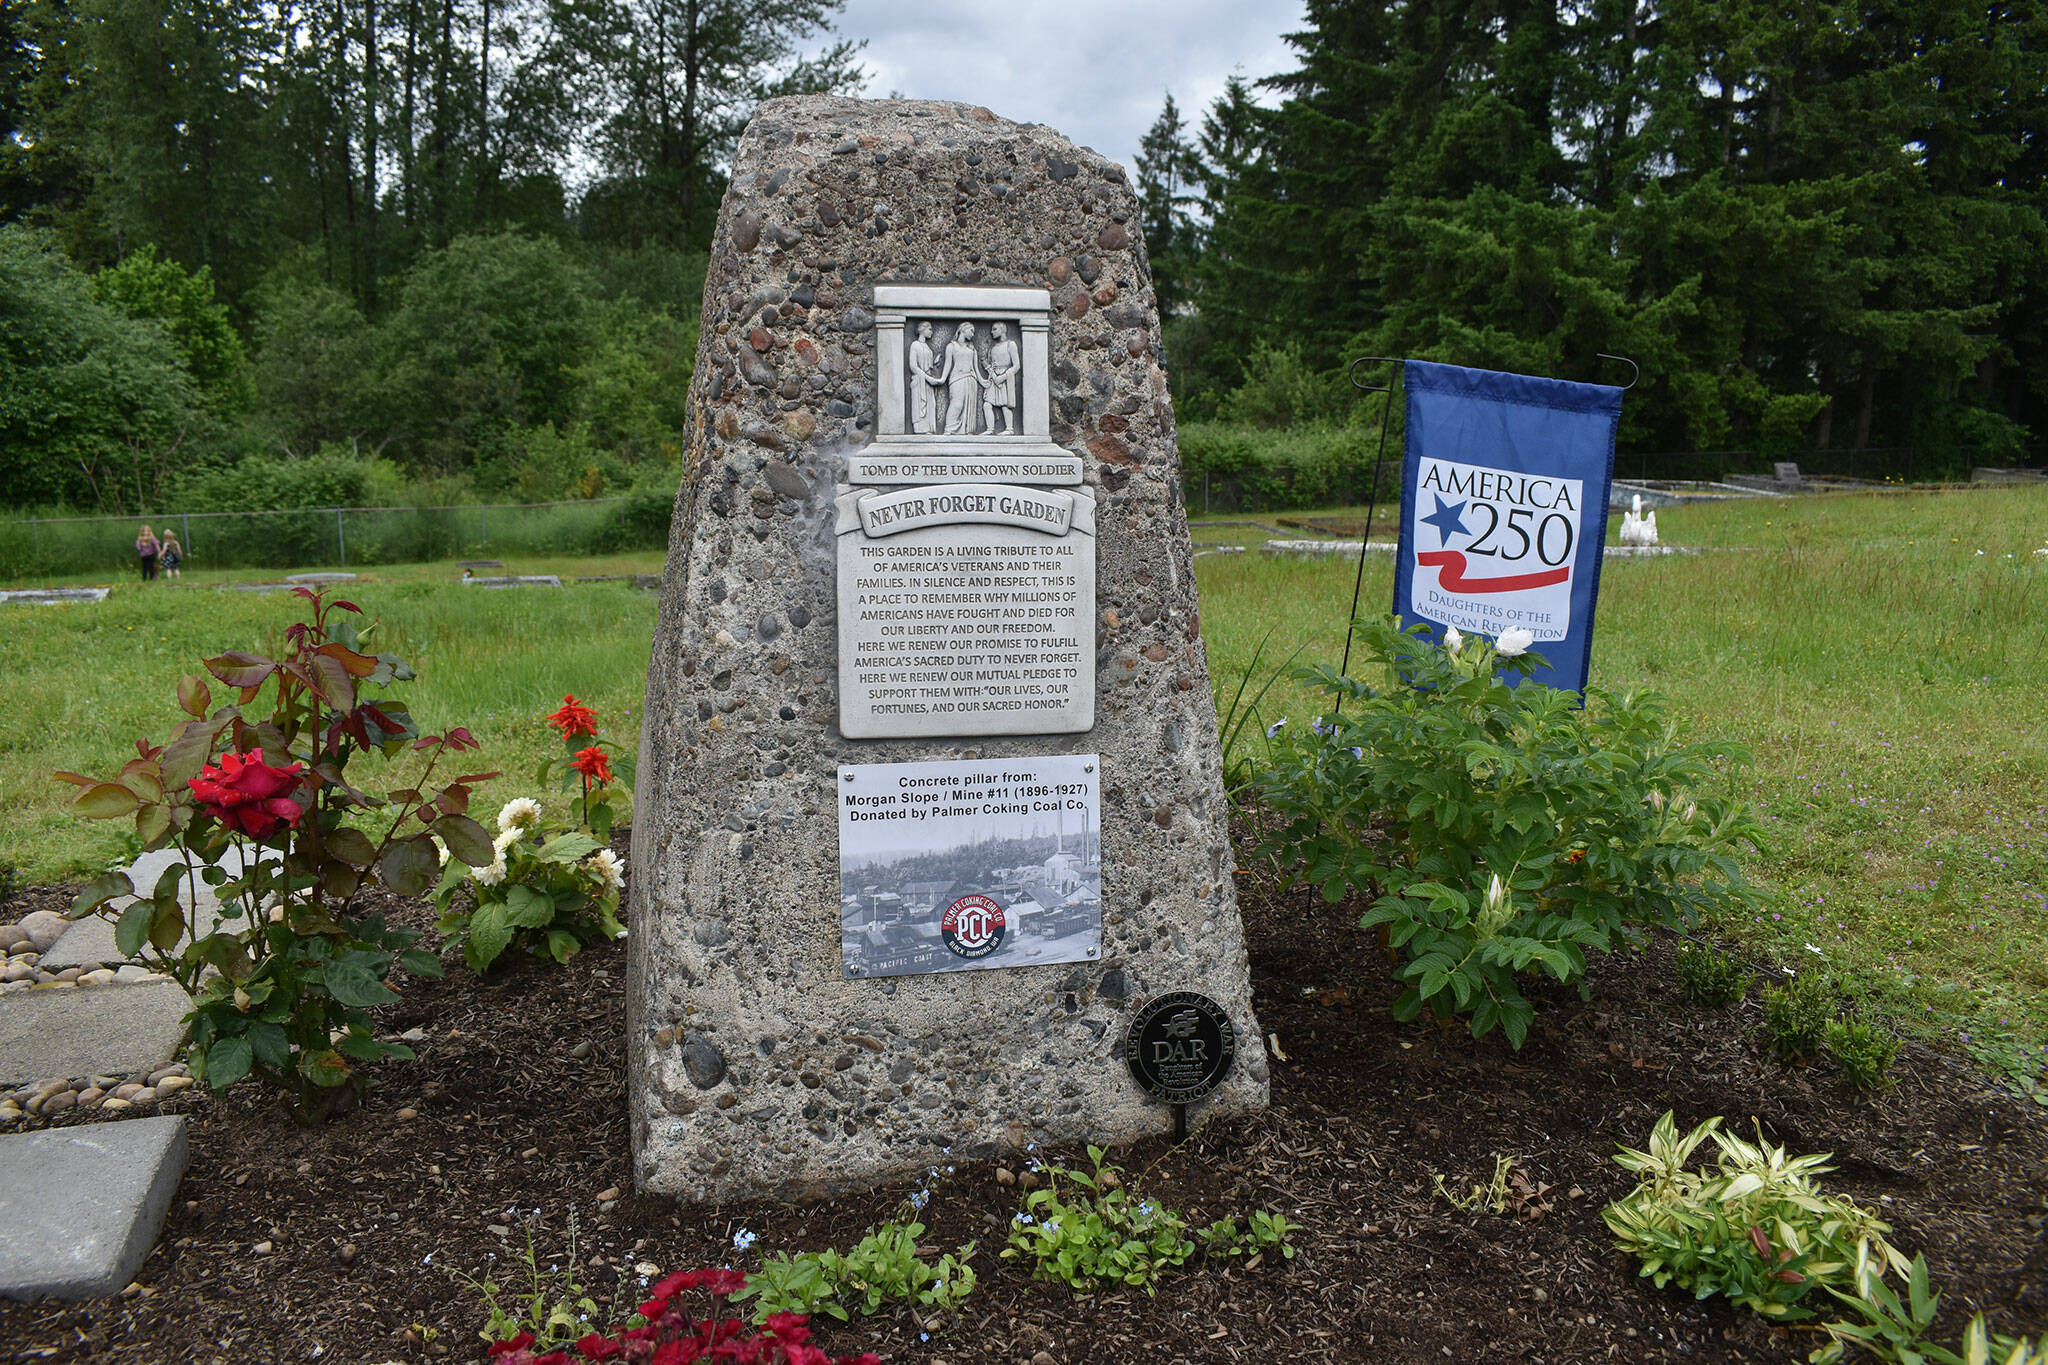 The stone pillar shown here was originally donated by Palmer Coking Coal Co. to the City of Black Diamond, which then donated it to the Never Forget Garden, pictured here on Saturday, June 8. Photo by Alex Bruell.